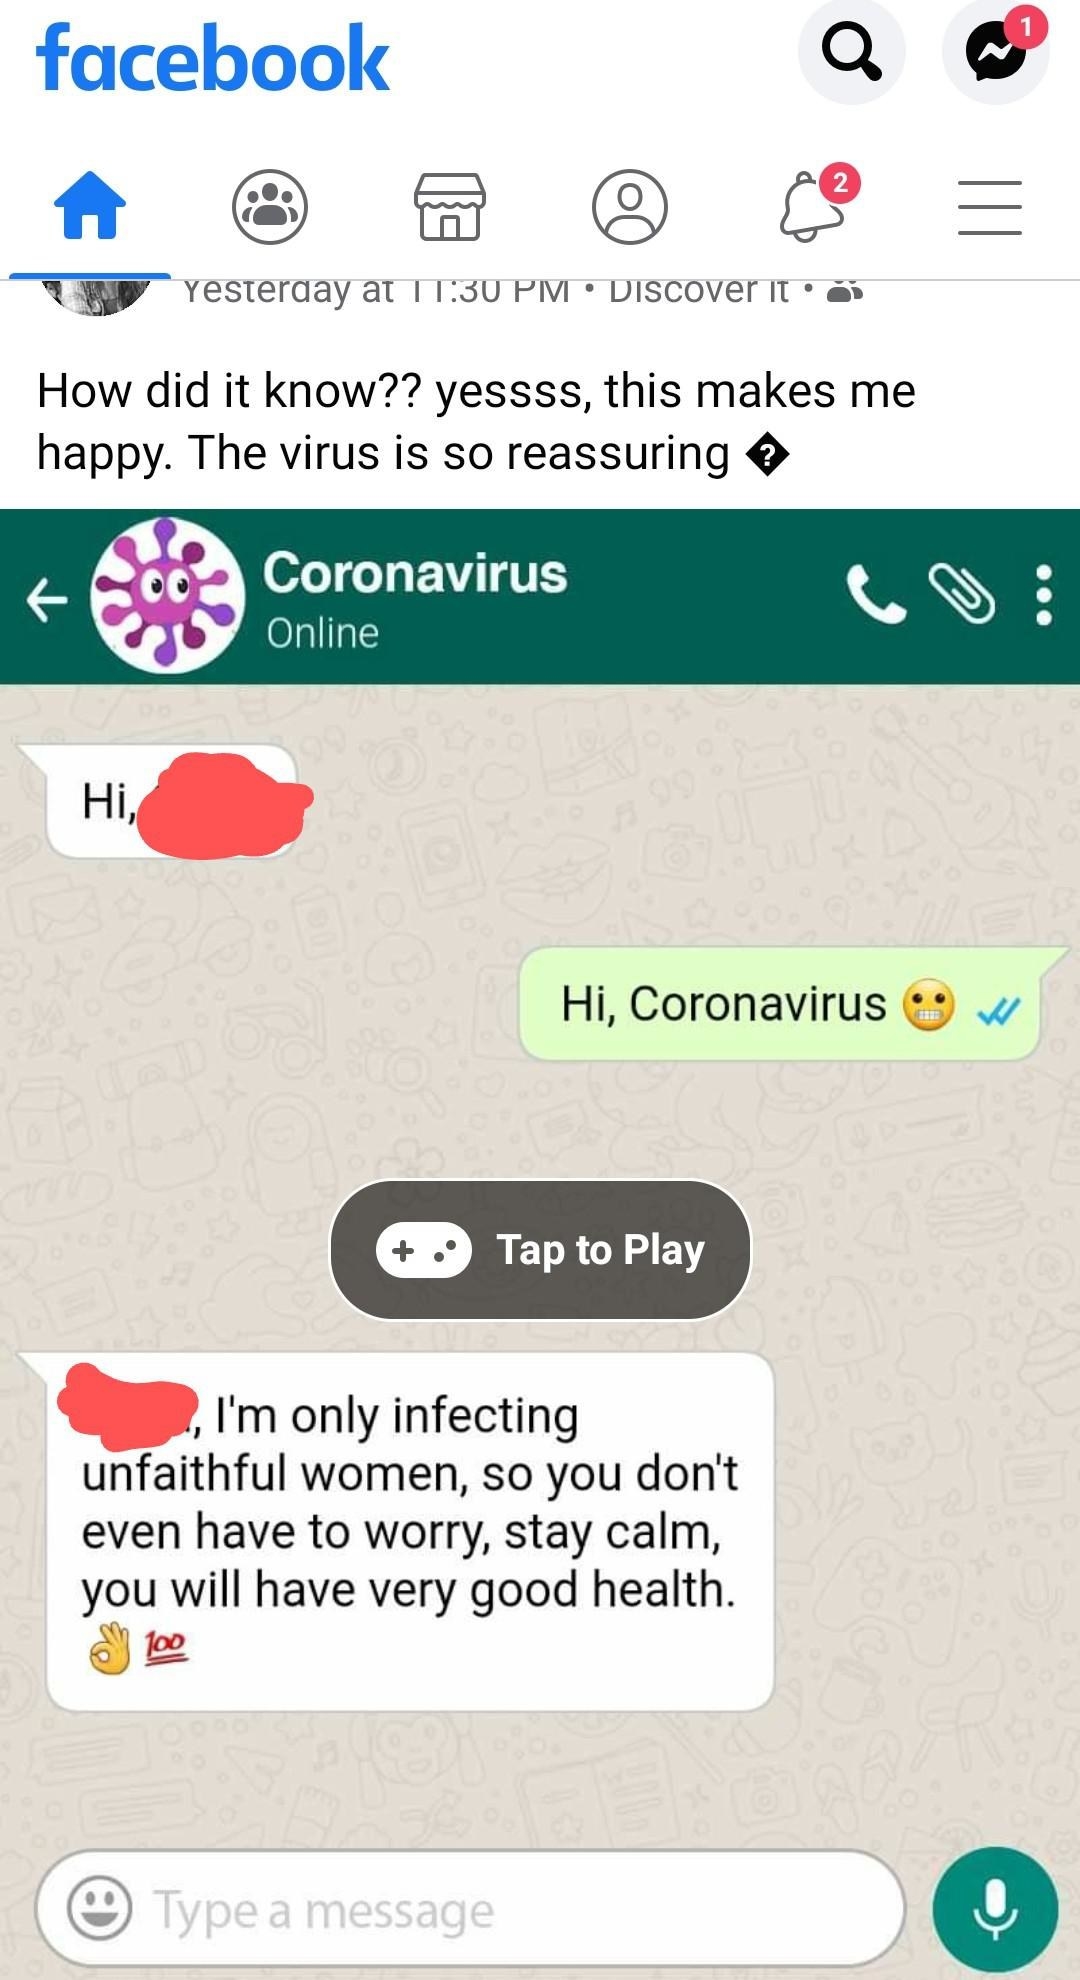 A screenshot of some kind of Facebook app where you have a conversation with the Coronavirus, the woman here is relieved because it tells her it&#x27;s &quot;only infecting unfaithful women&quot;